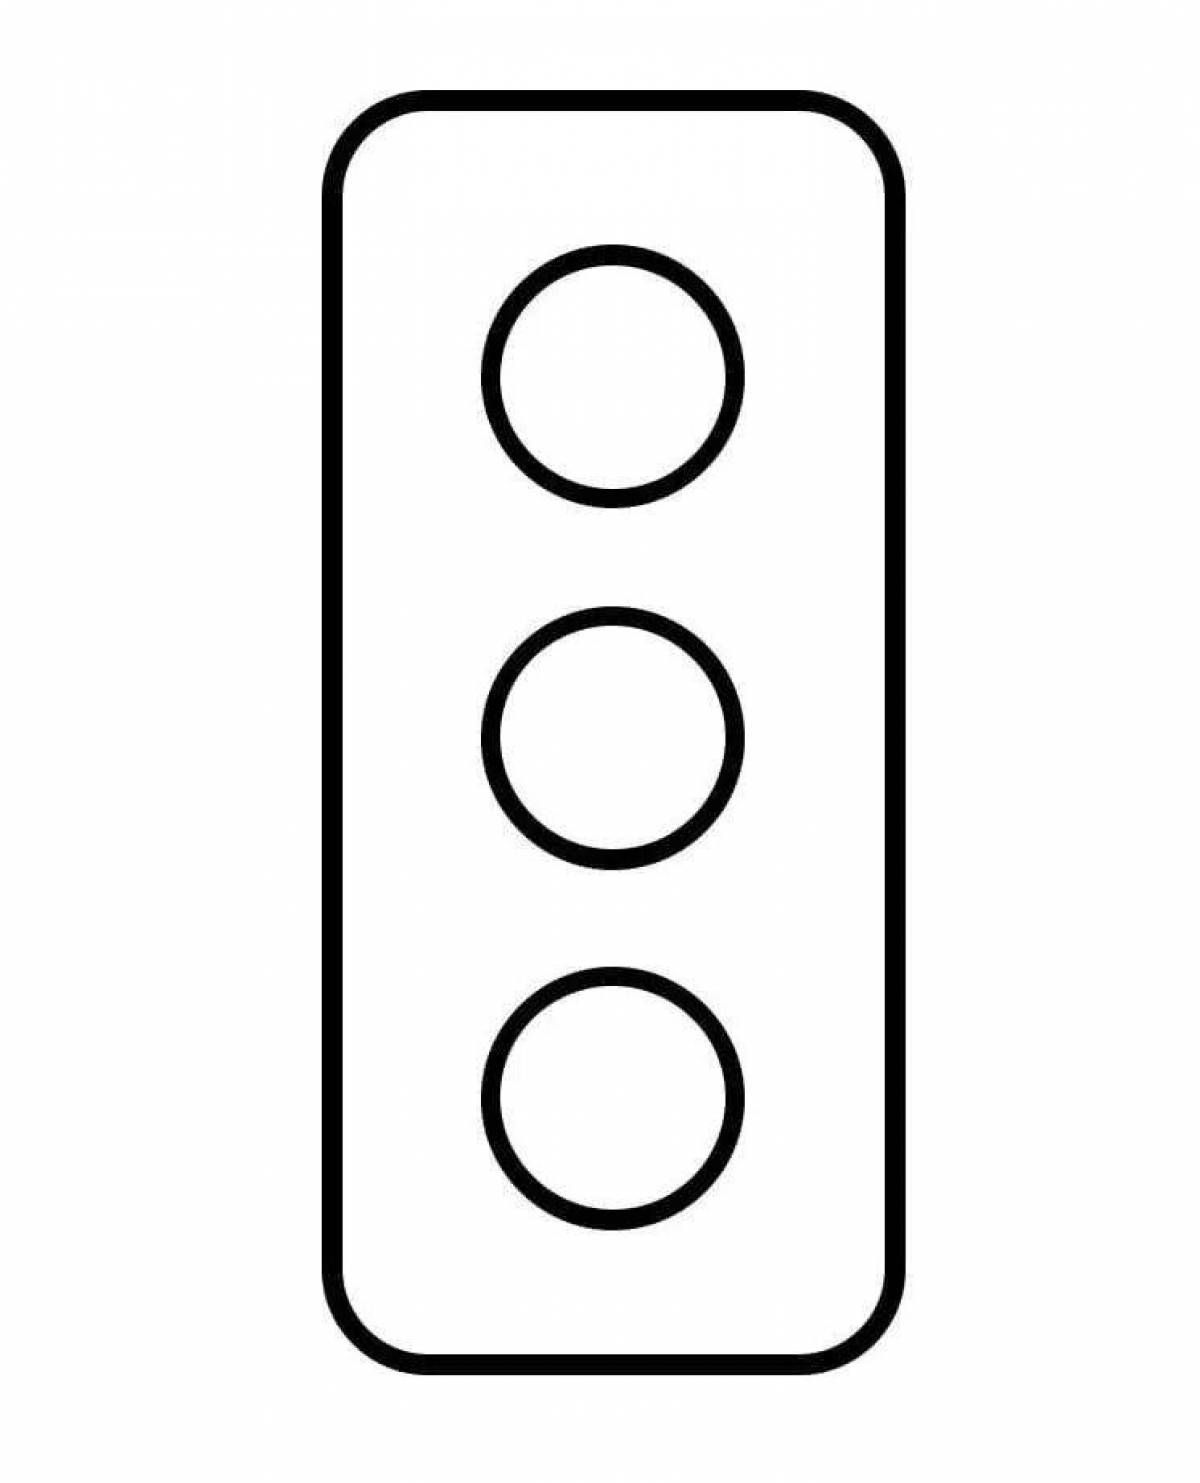 Magic traffic light coloring page for 2-3 year olds